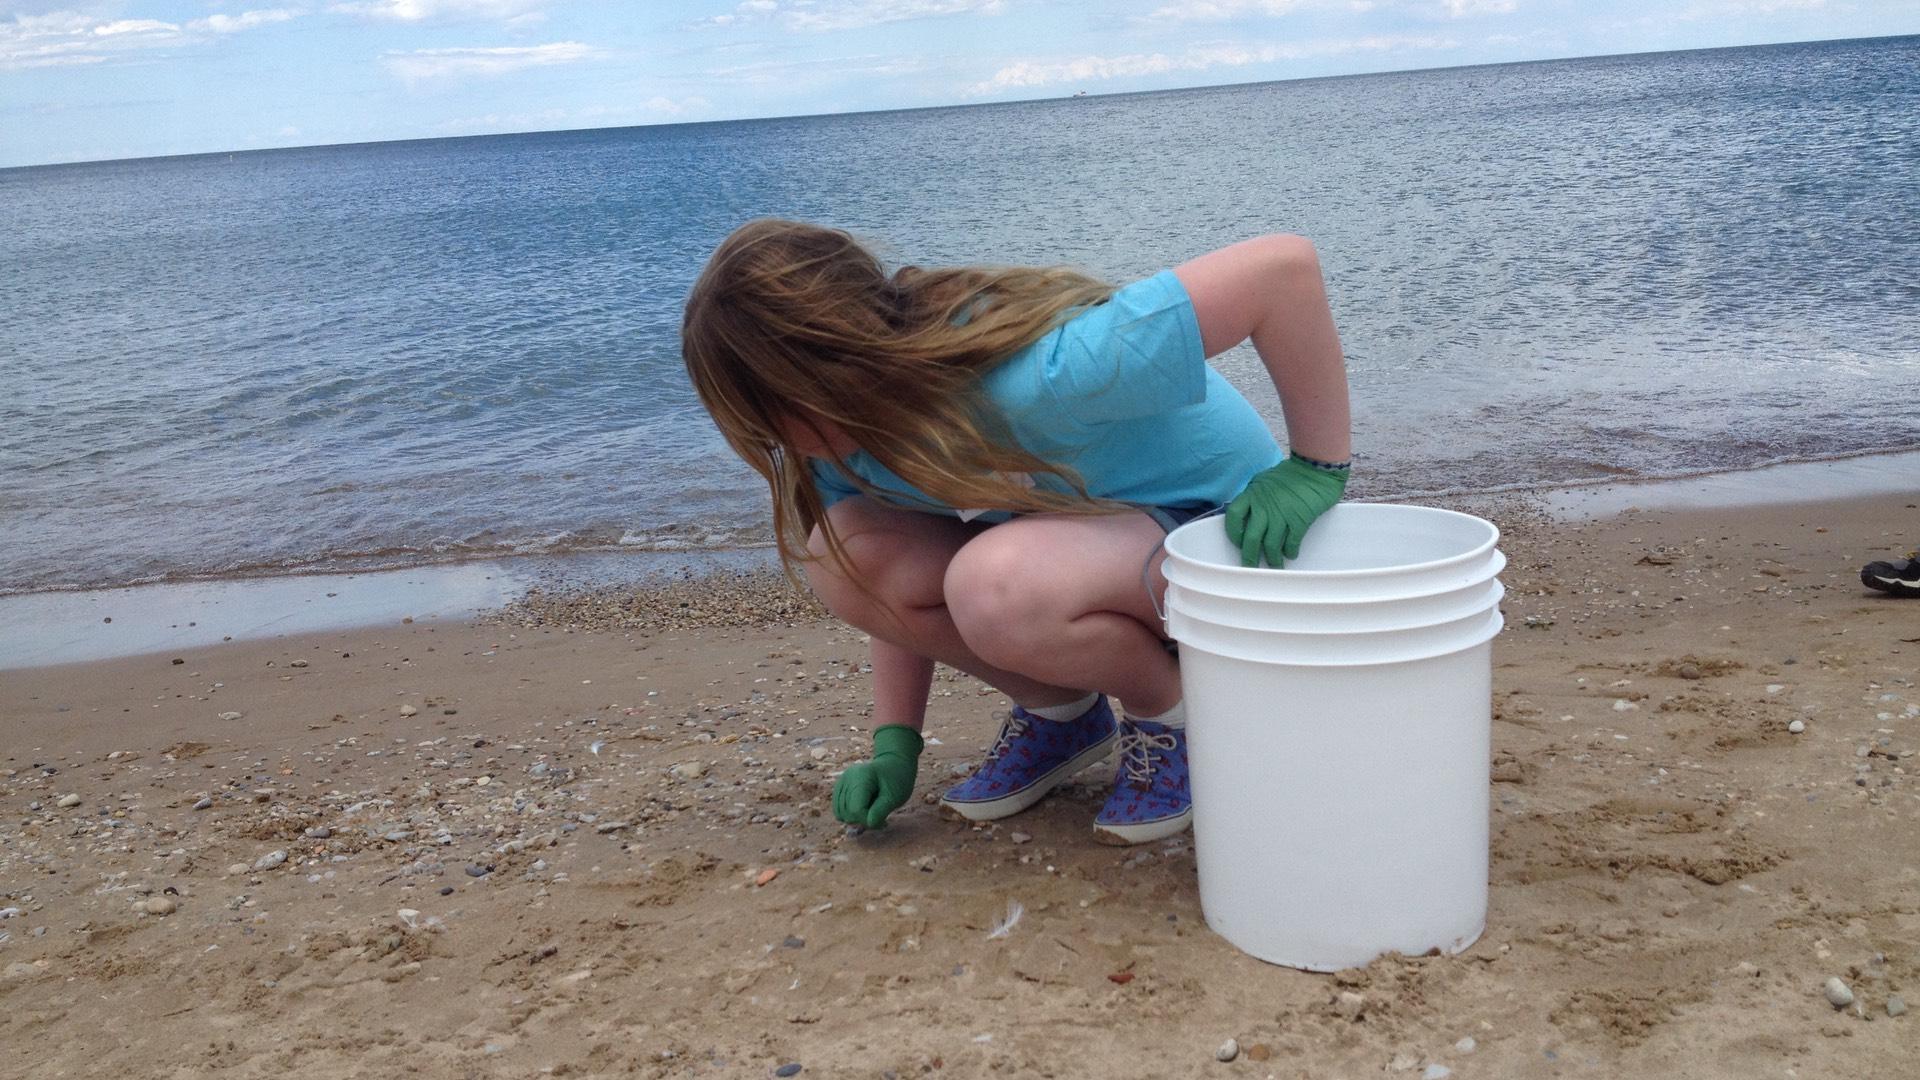 Alliance for the Great Lakes has been holding beach cleanups for 20 years. (Courtesy of Shedd Aquarium)